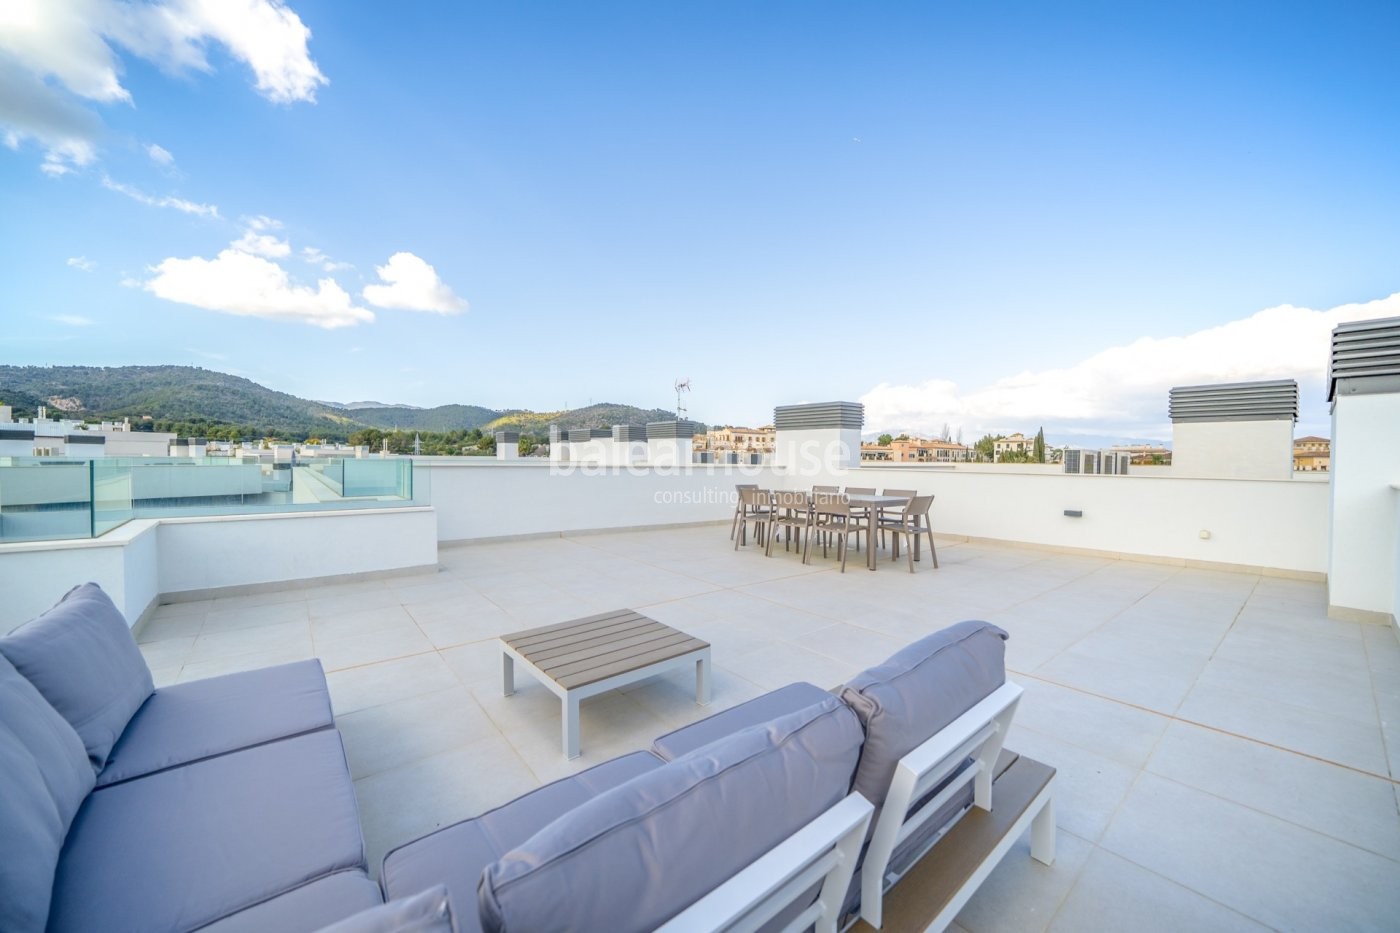 Fantastic penthouse with private solarium in a well-kept complex close to the golf course in Palma